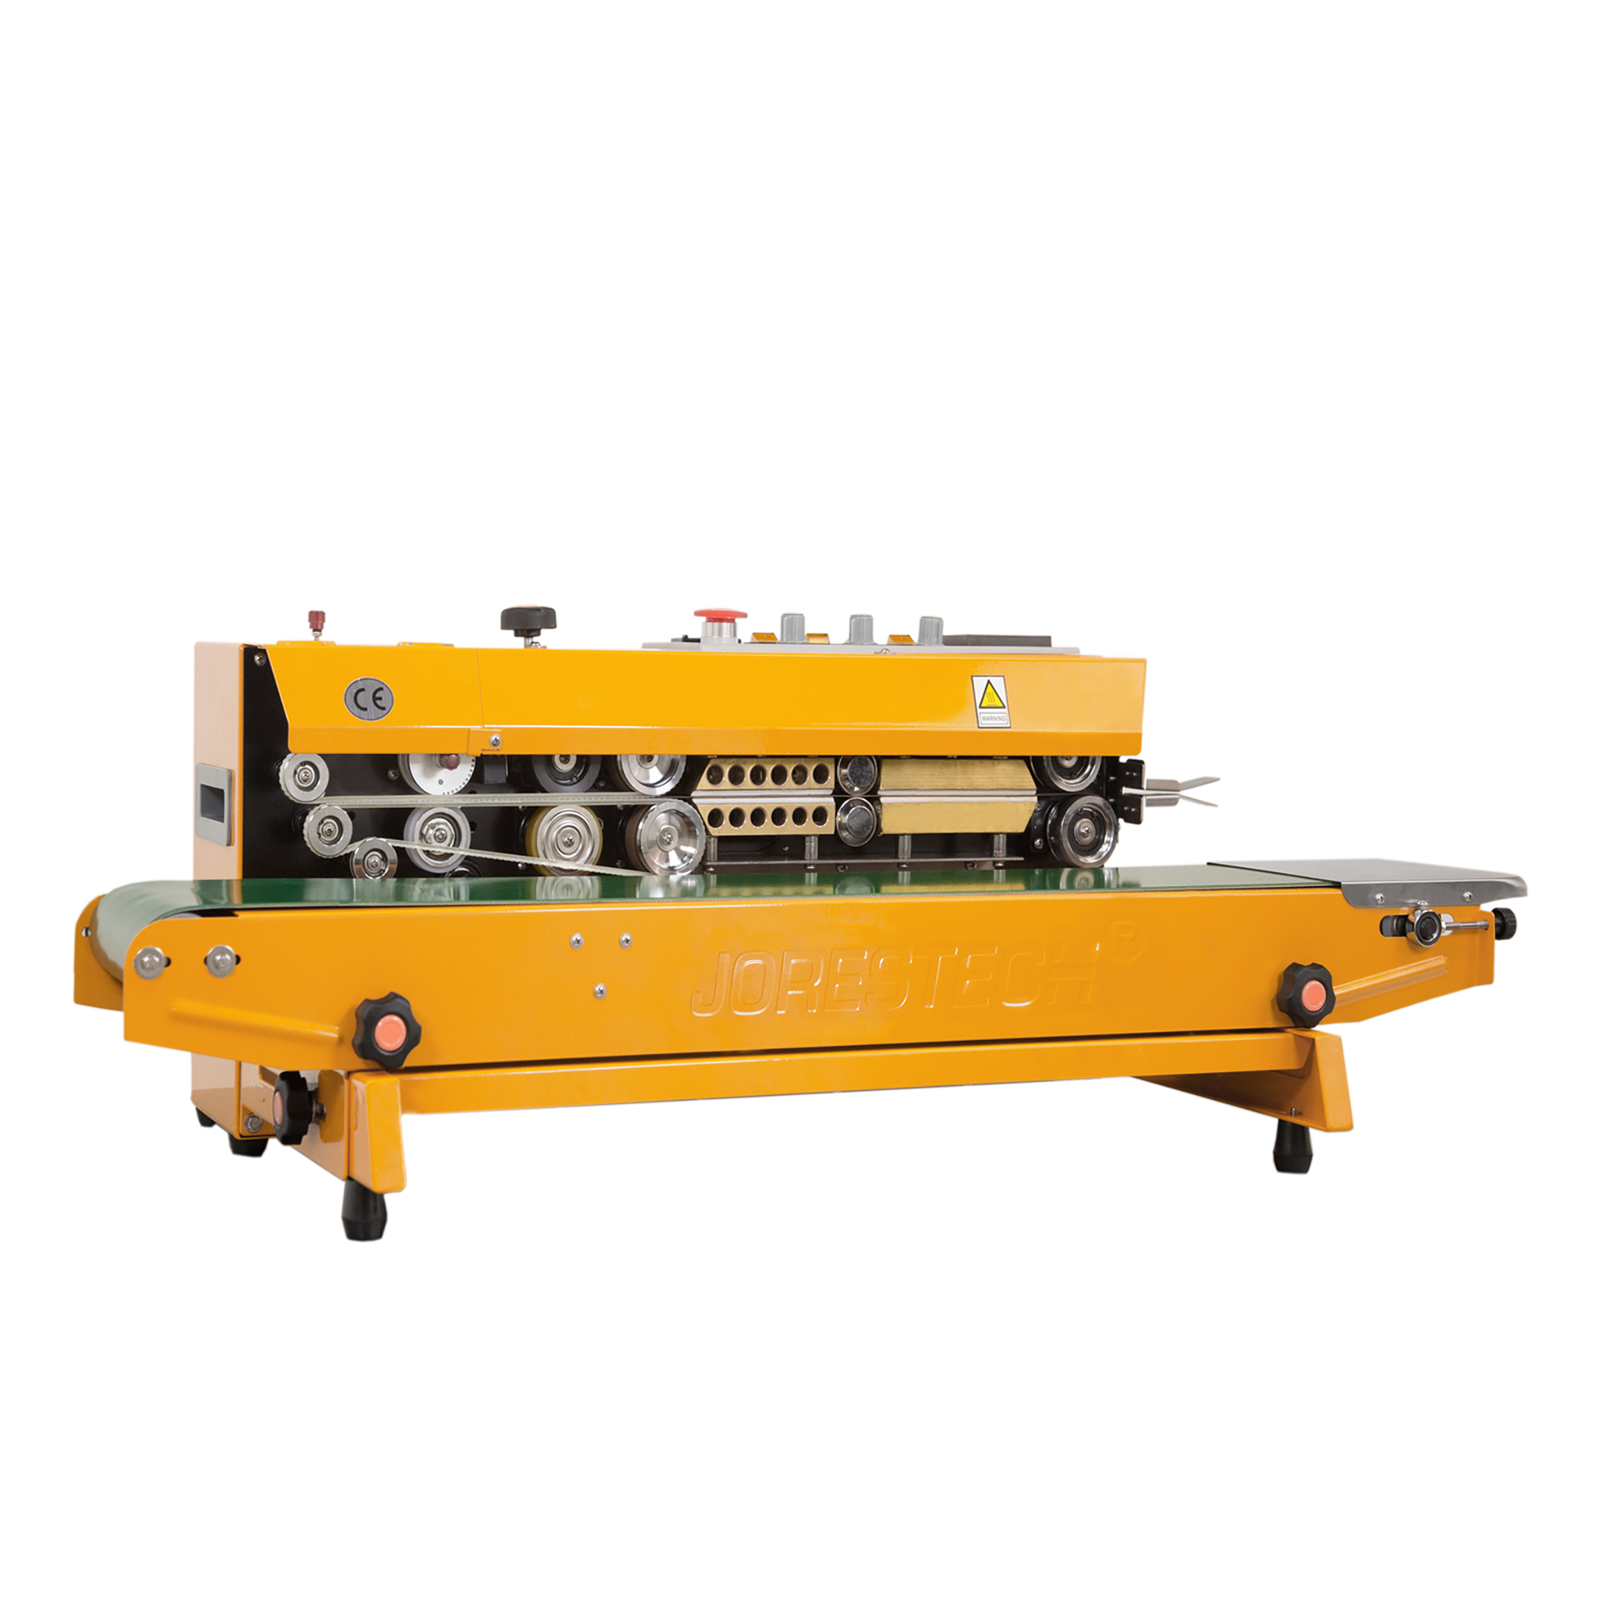 Front view of the JORES TECHNOLOGIES® horizontal and vertical continuous band sealer. The bag sealer is yellow.